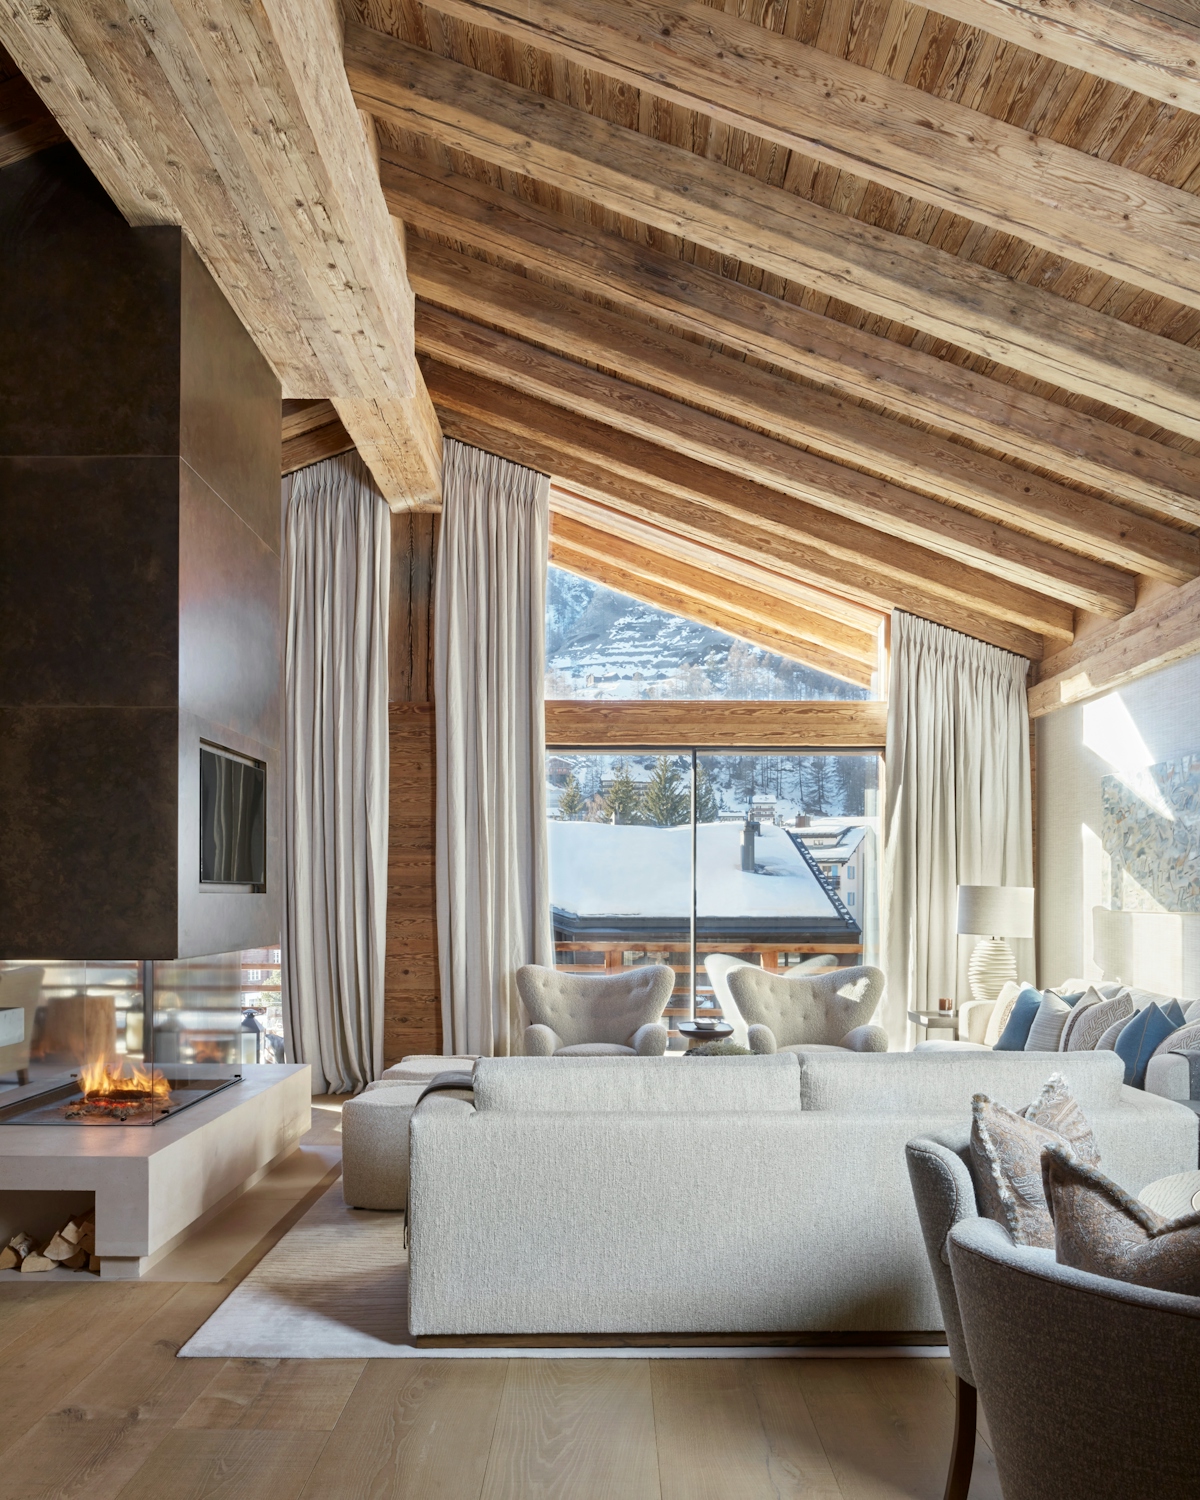 Katharine Pooley designed ski chalet interior with oak wood beams and floor, calming off-white upholstery and large open fireplace